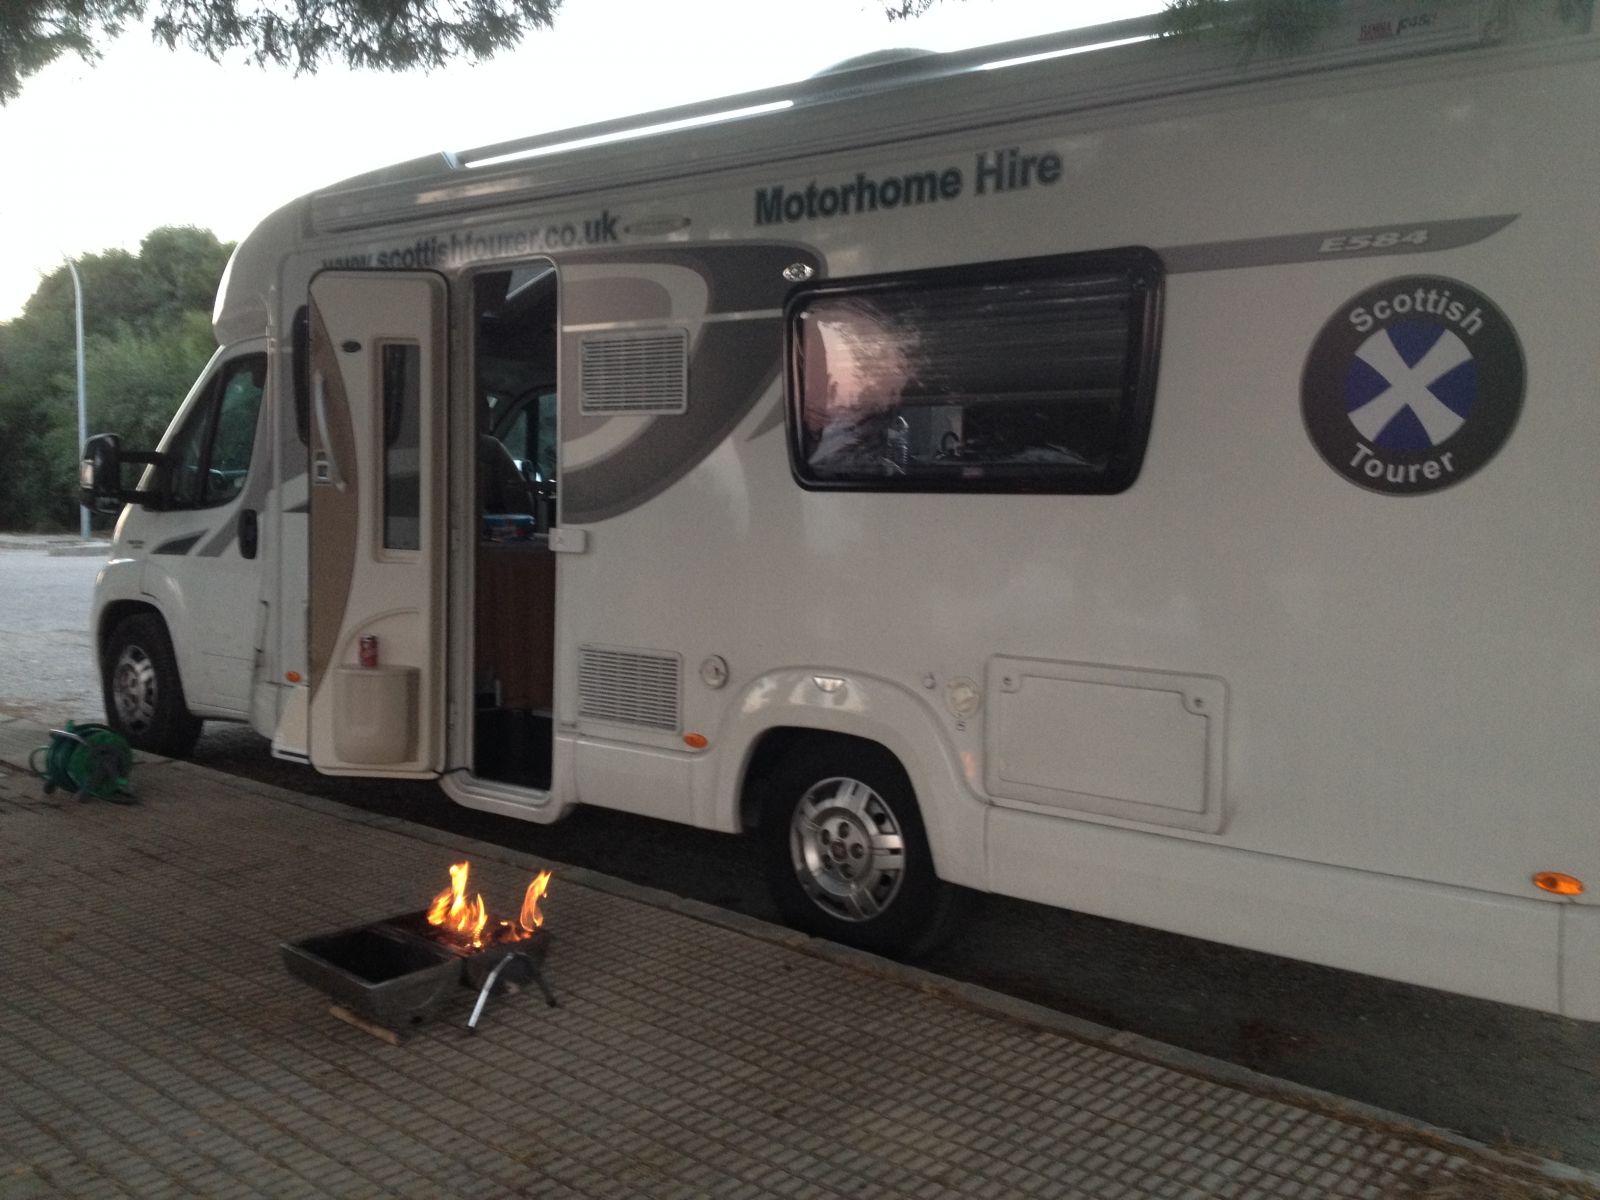 Enjoying a bbq in Spain with our motorhome